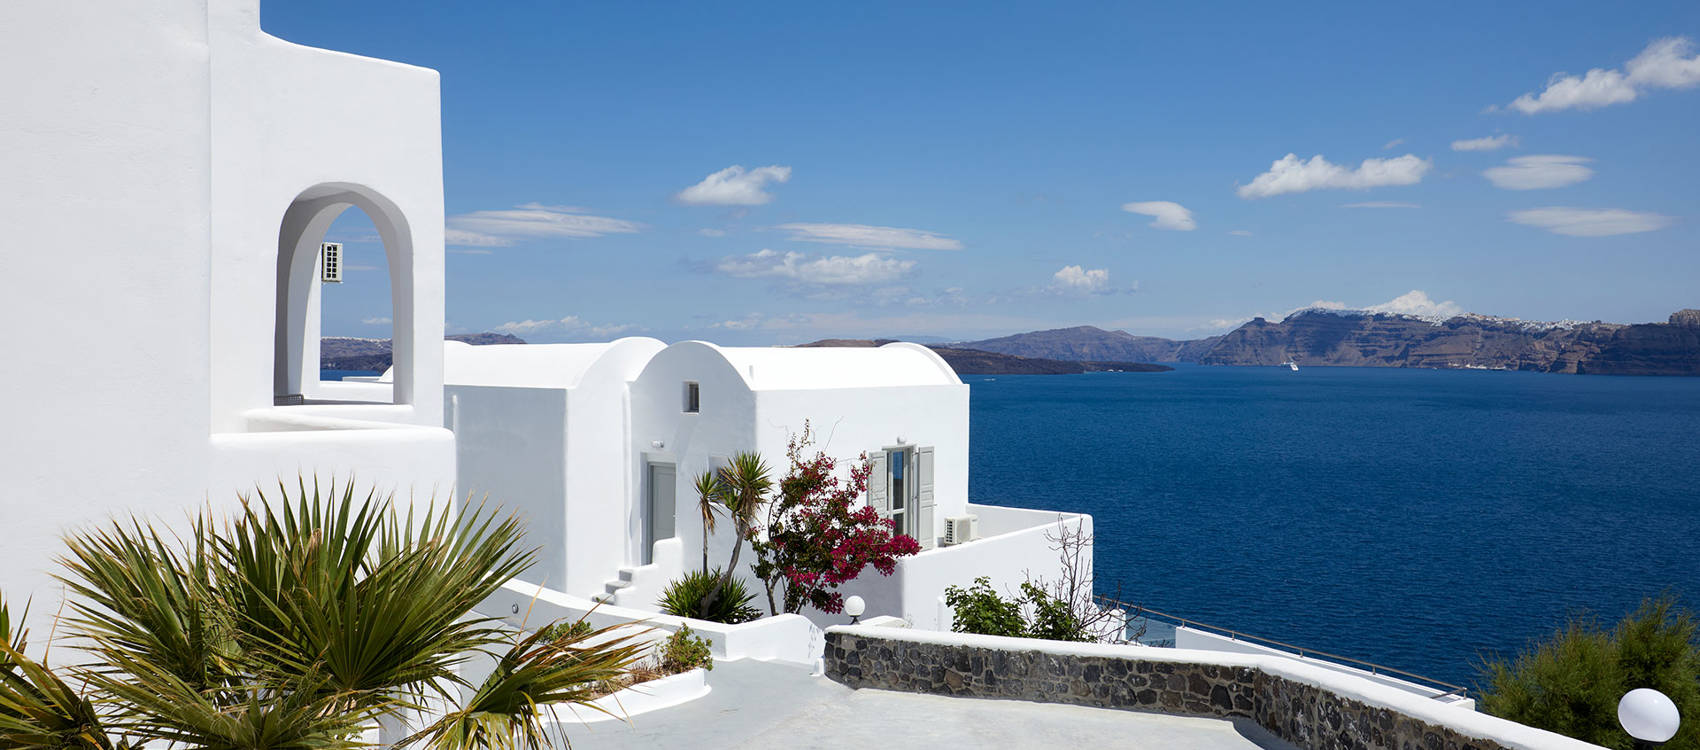 
Santorini View Hotel with white houses, gardens and caldera view